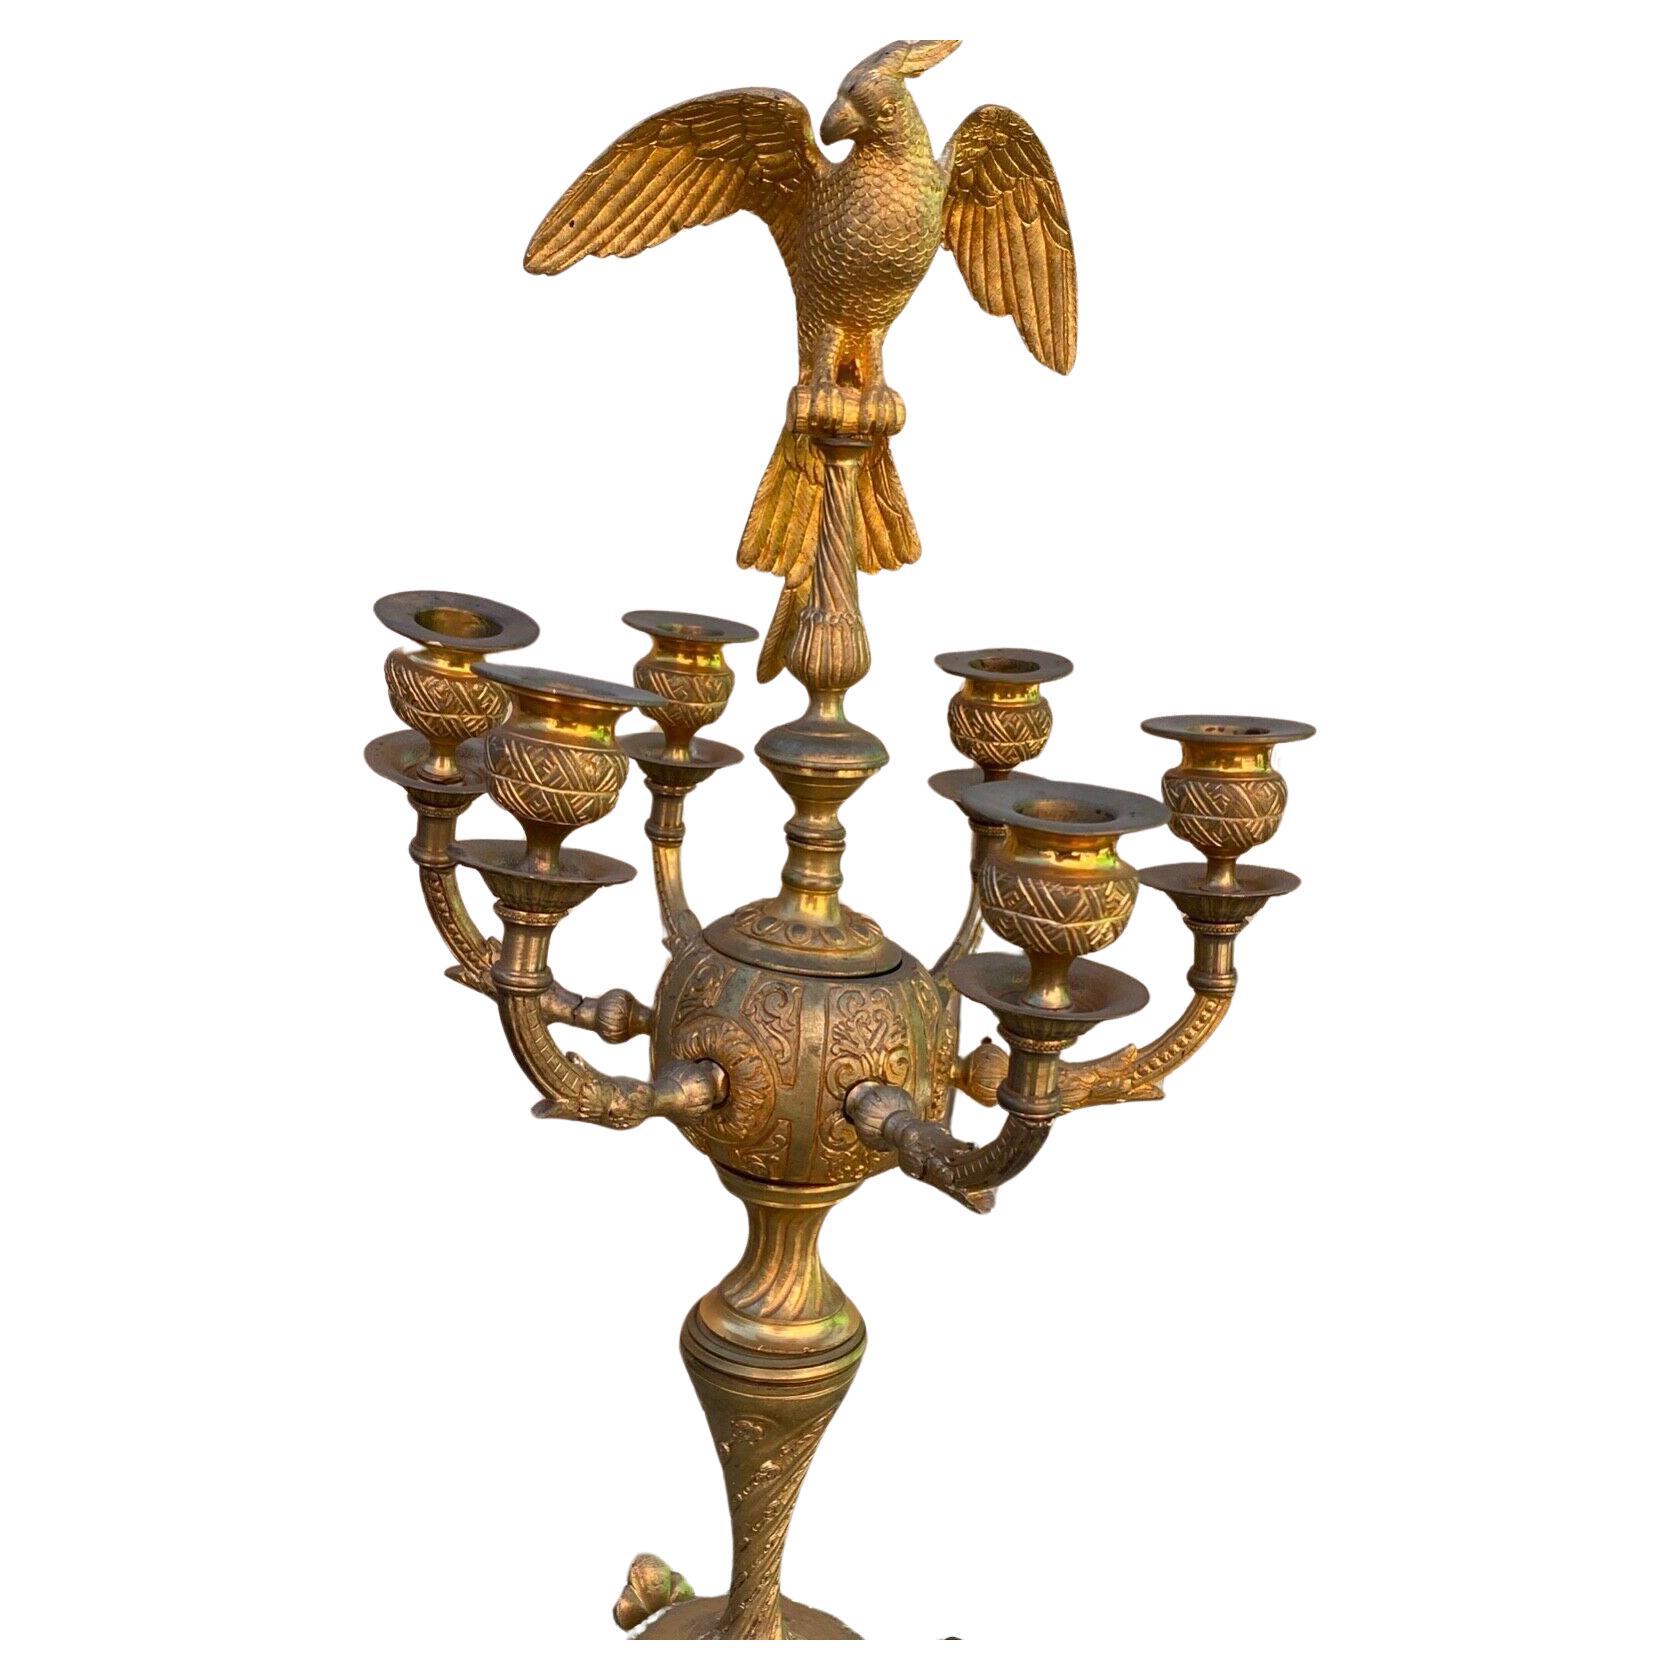 Rare Pair of c1800 Huge French Louis XV style Gilt Bronze Opposing Face Parrot Candelabra. These candelabra are in the style of Charles Cressent. Very heavy pair. Incredible detail.